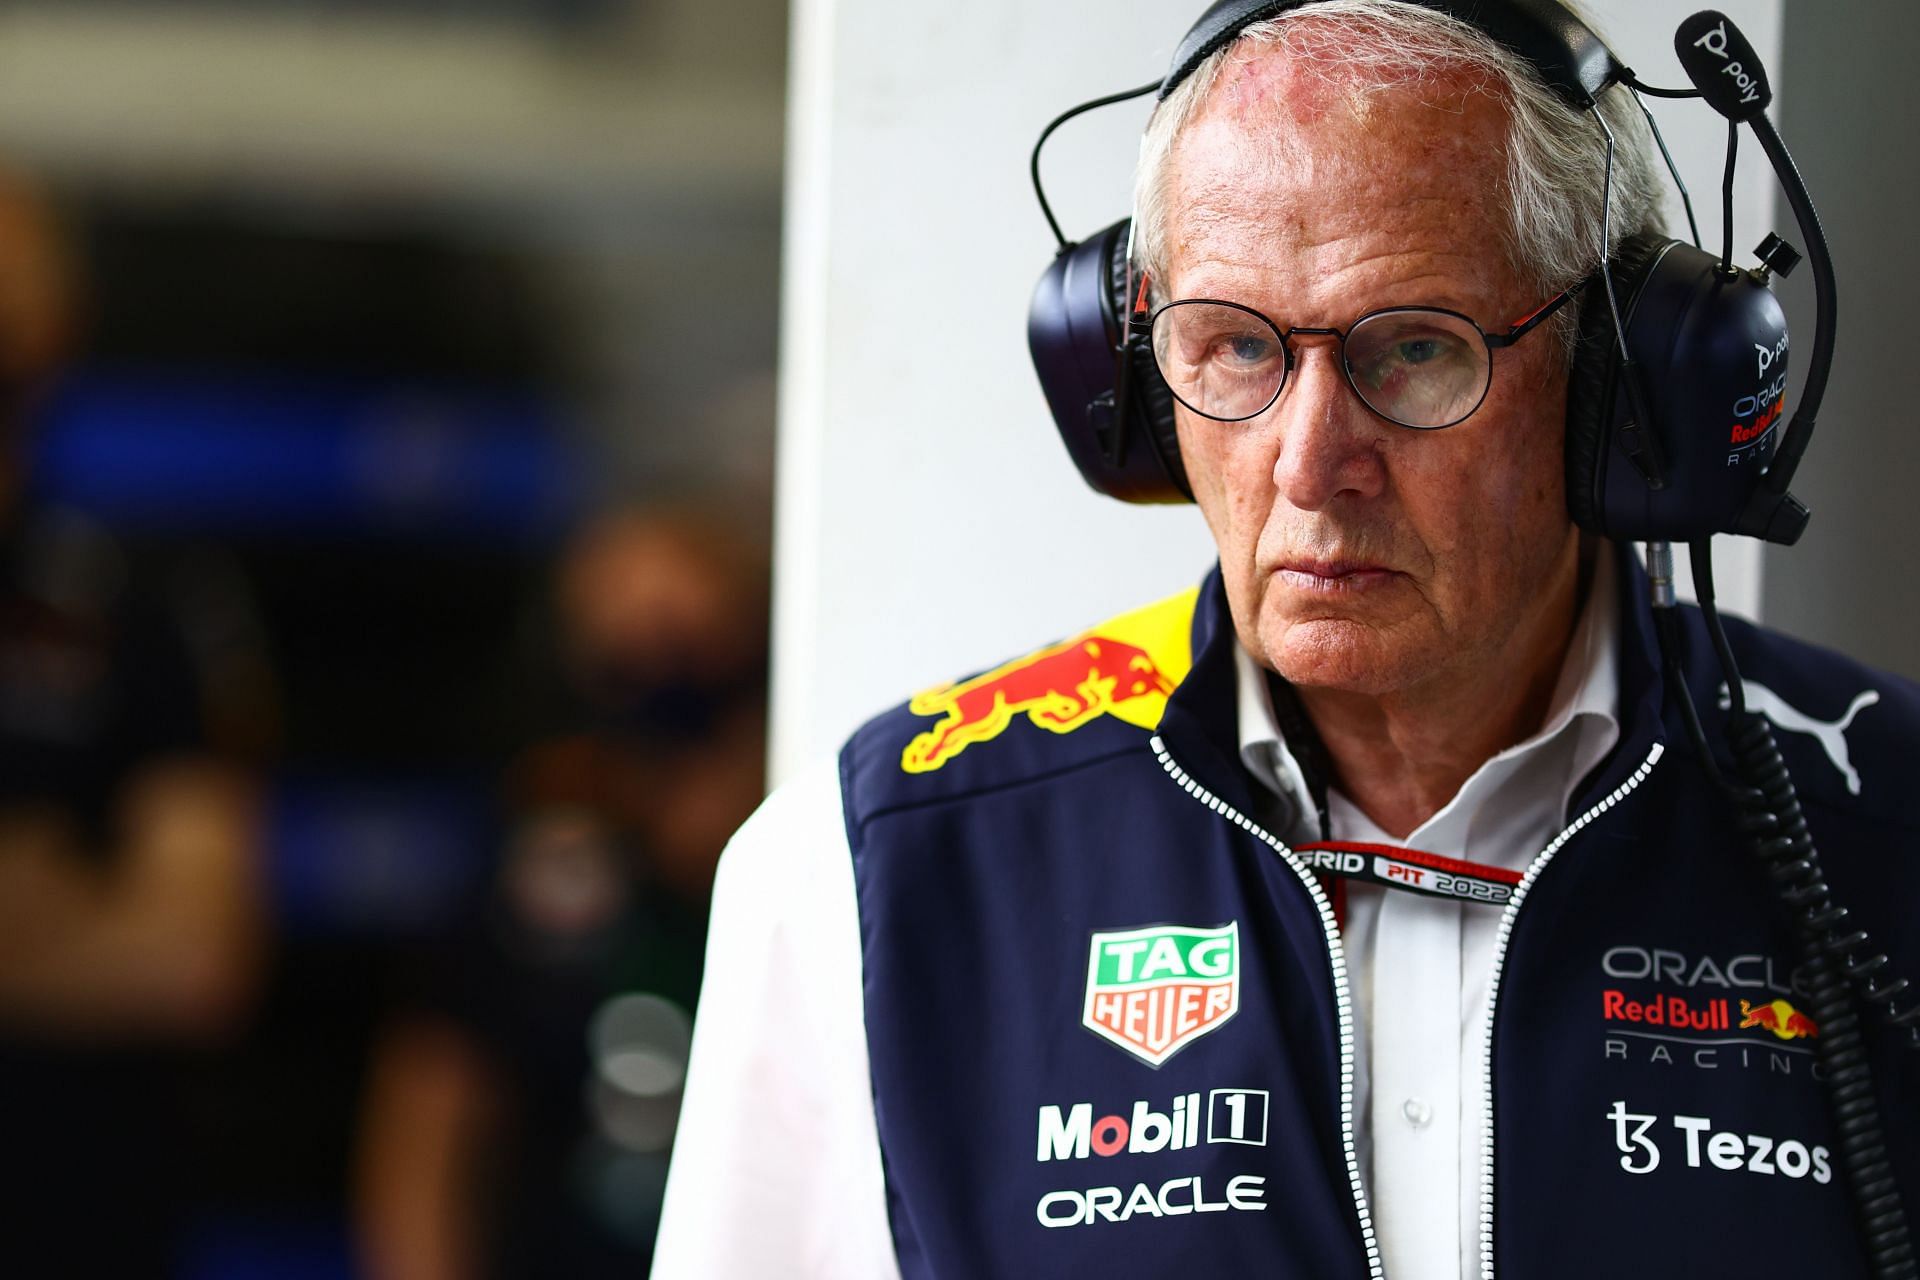 Helmut Marko was unhappy with the removal of 4th DRS section from Turn 8 to Turn 9